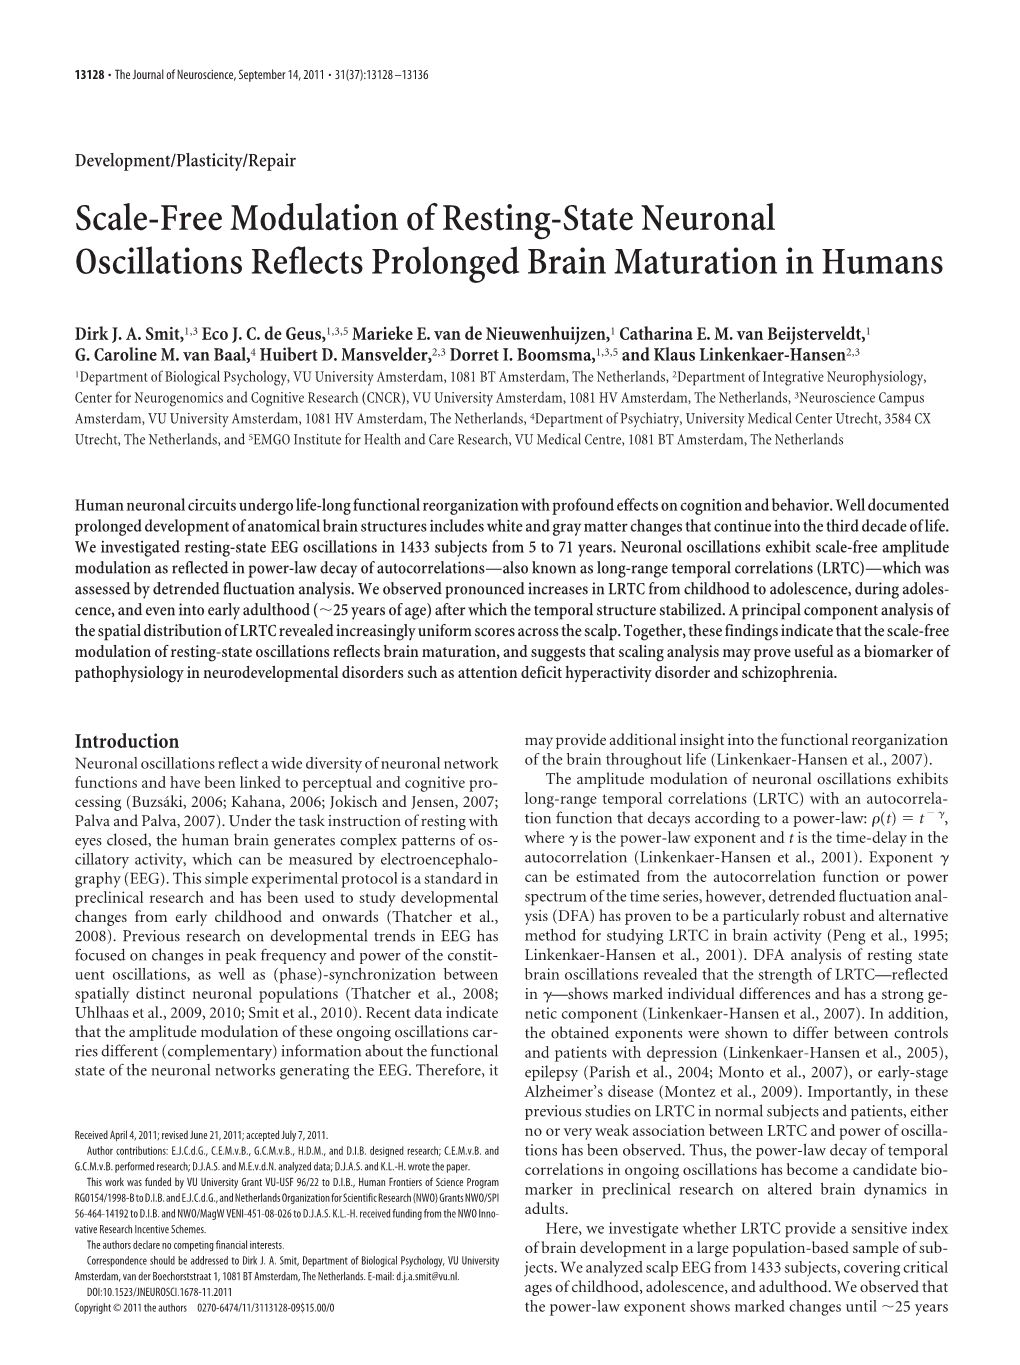 Scale-Free Modulation of Resting-State Neuronal Oscillations Reflects Prolonged Brain Maturation in Humans